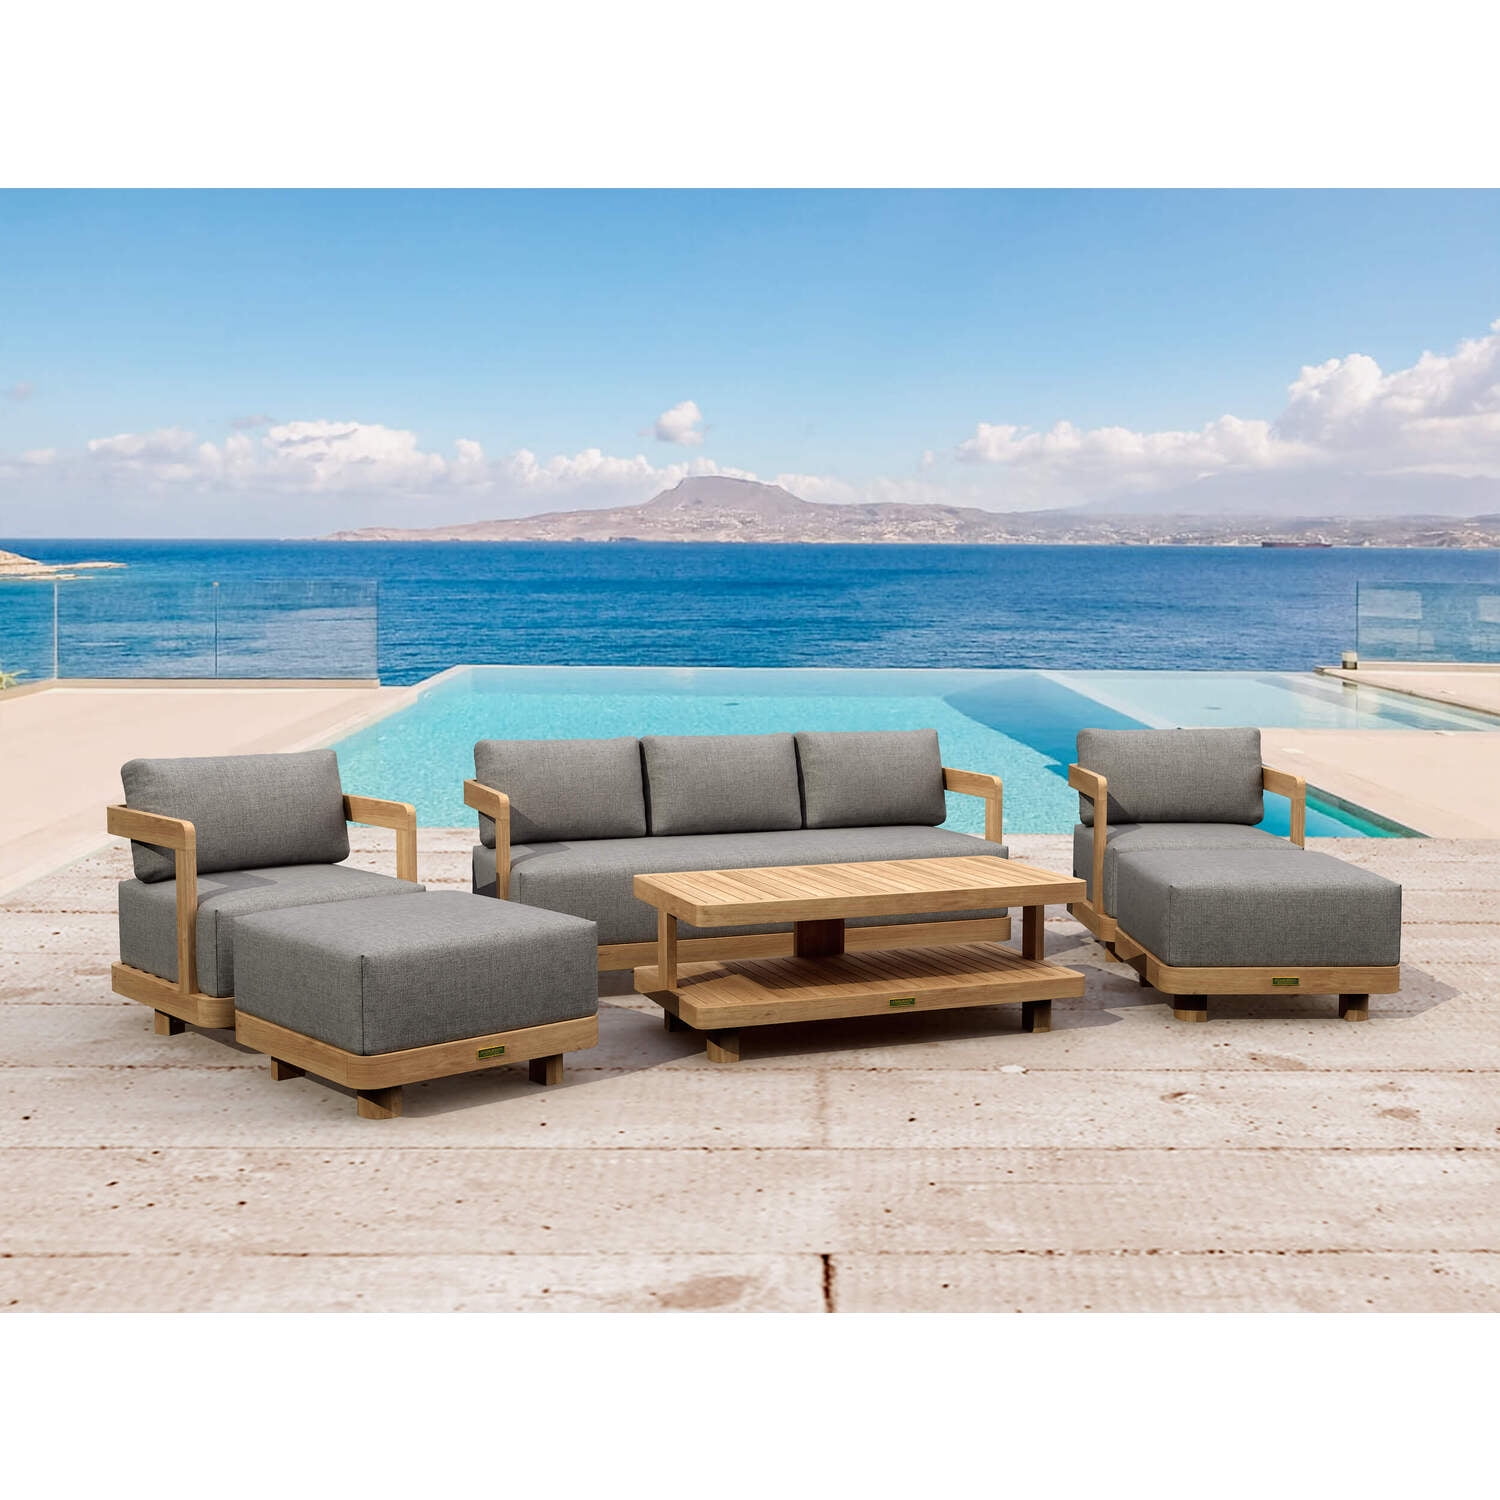 Picture of Anderson Teak SET-903 Granada Deep Seating Set, Natural Smooth Well Sanded - 6 Piece